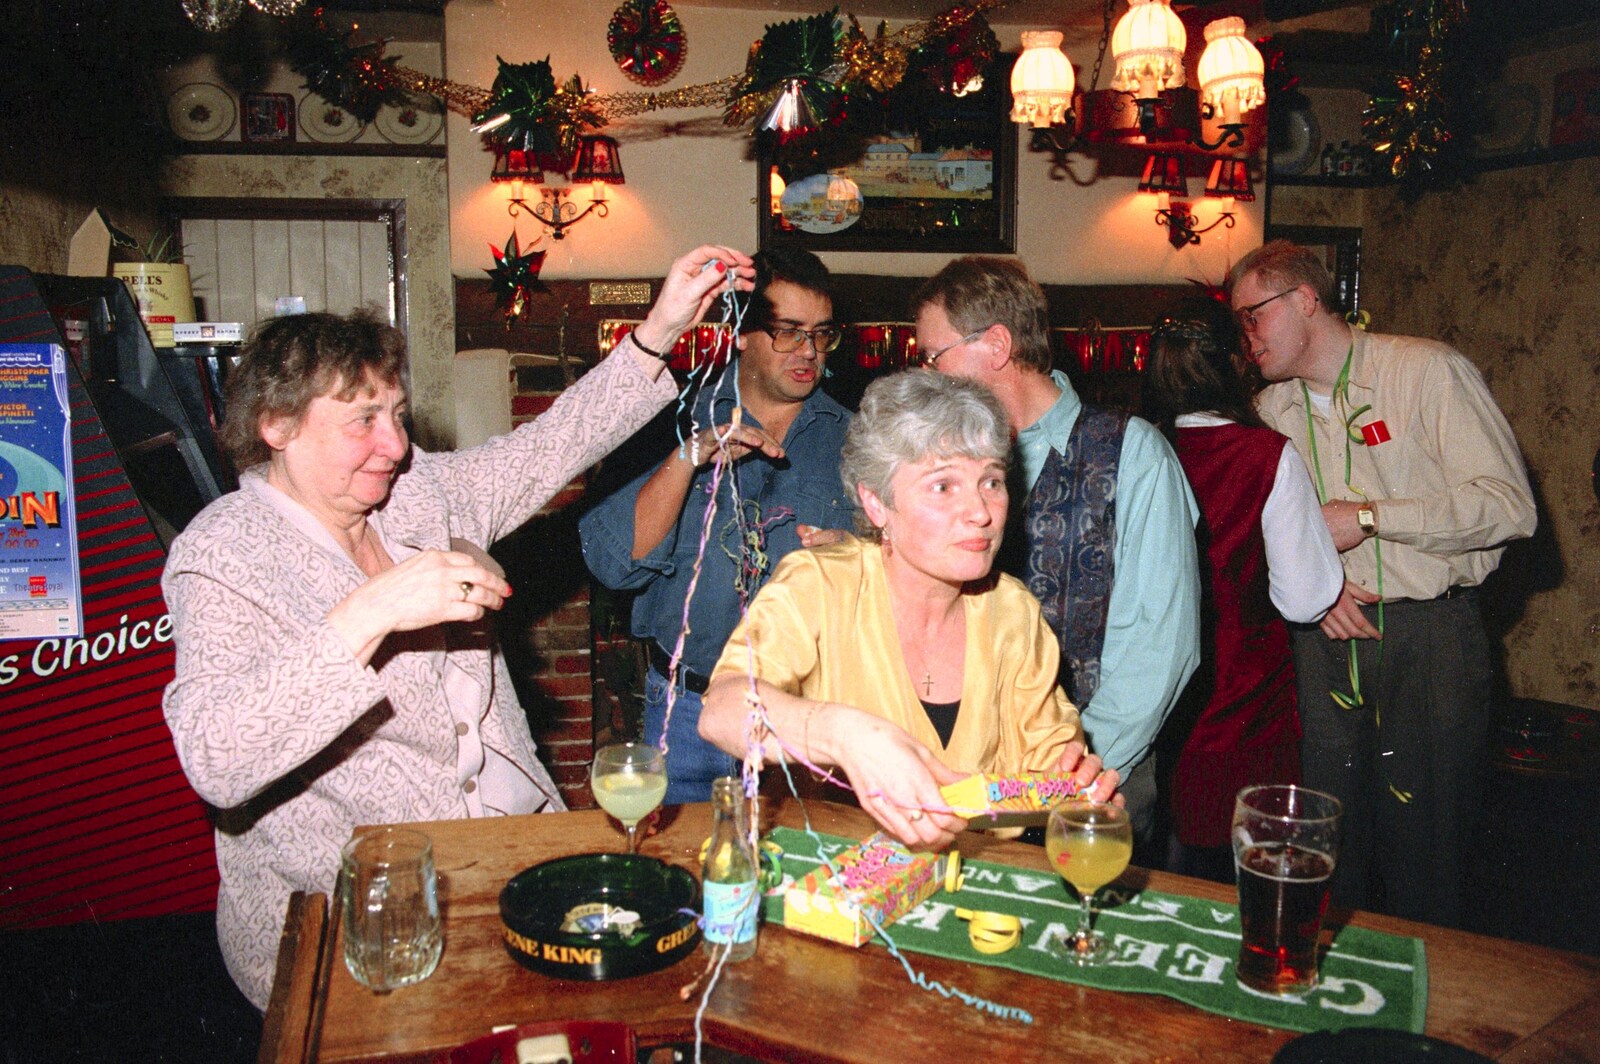 Nanna waves around some streamers from New Year's Eve at the Swan Inn, Brome, Suffolk - 31st December 1994